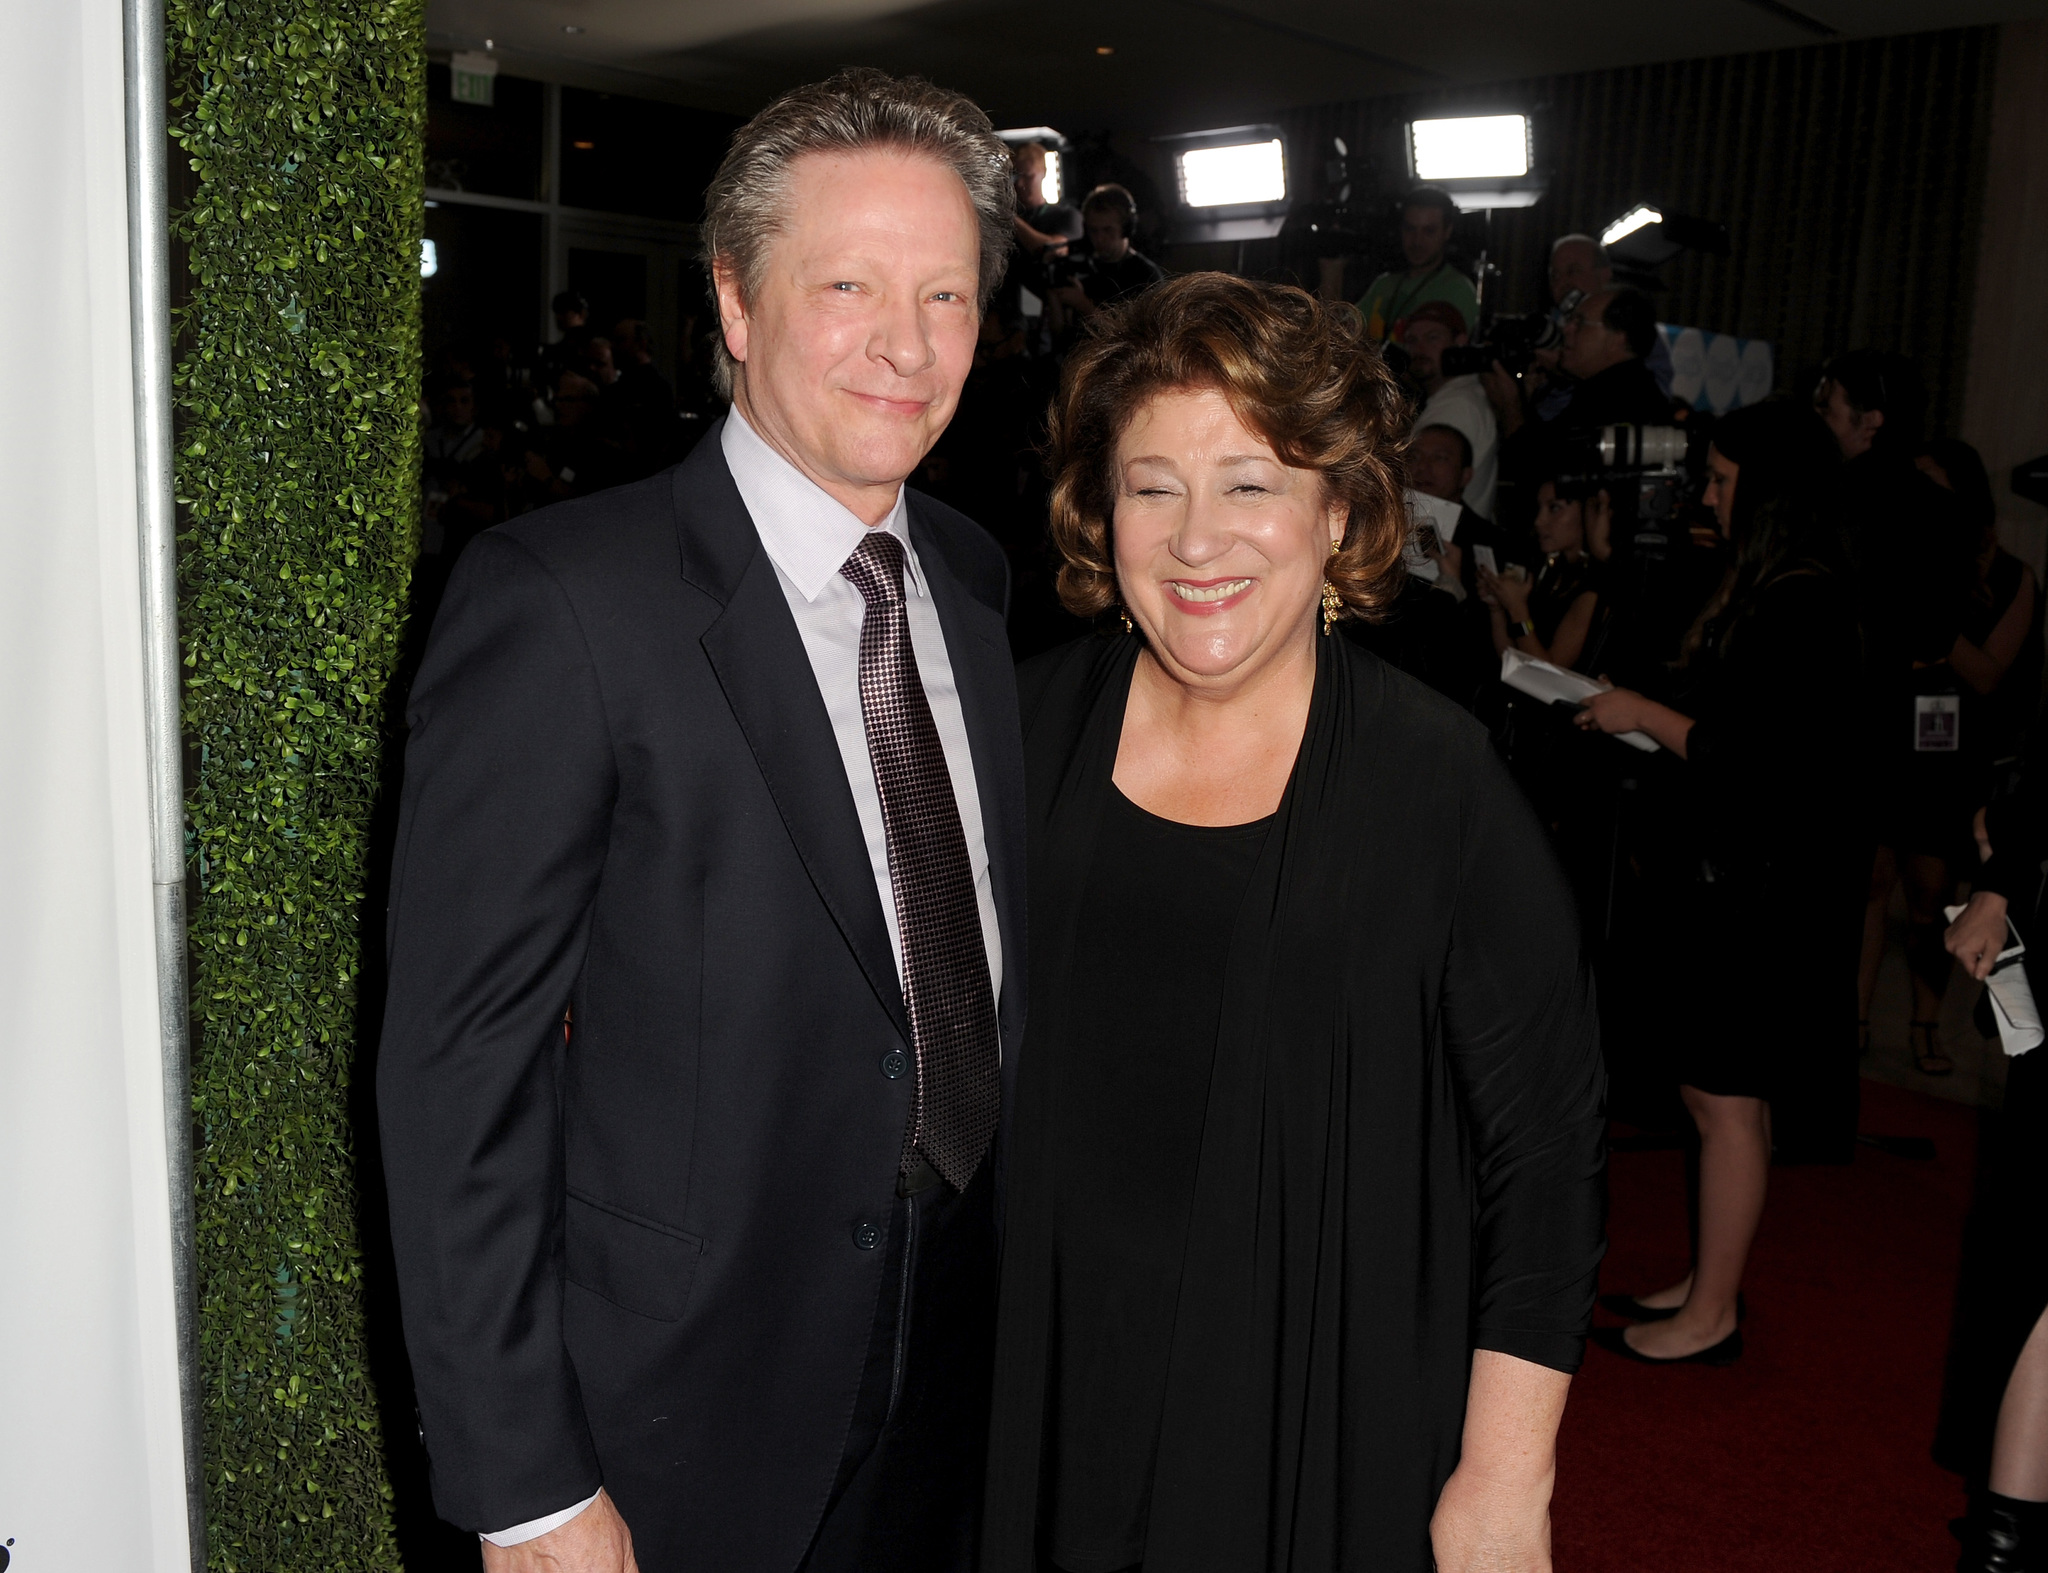 Chris Cooper and Margo Martindale